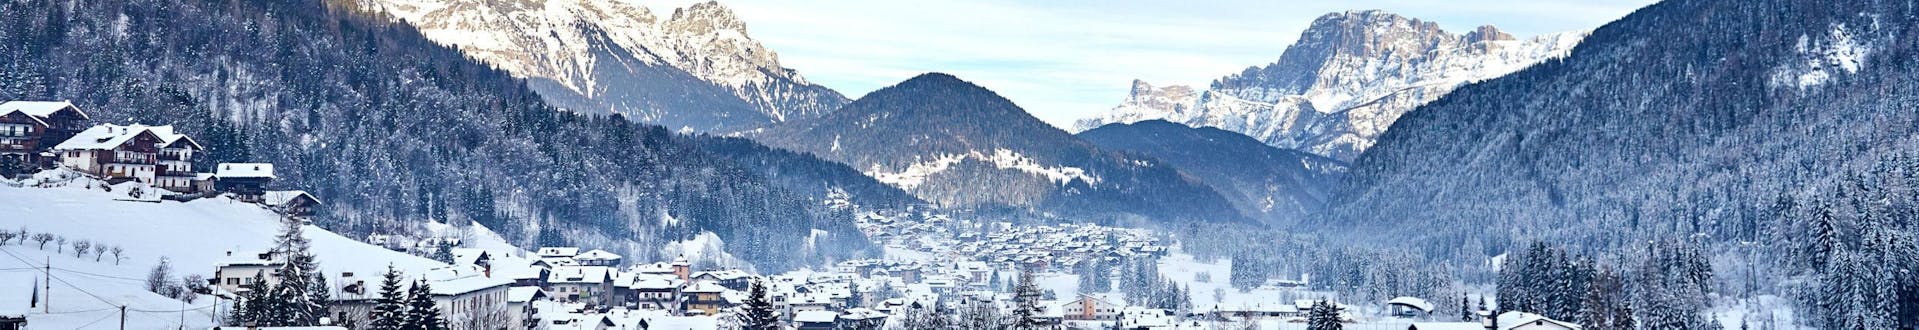 An image of Falcade, a picturesque Italian village nestled between the mountains, where aspiring skiers can book ski lessons with one of the local ski schools.